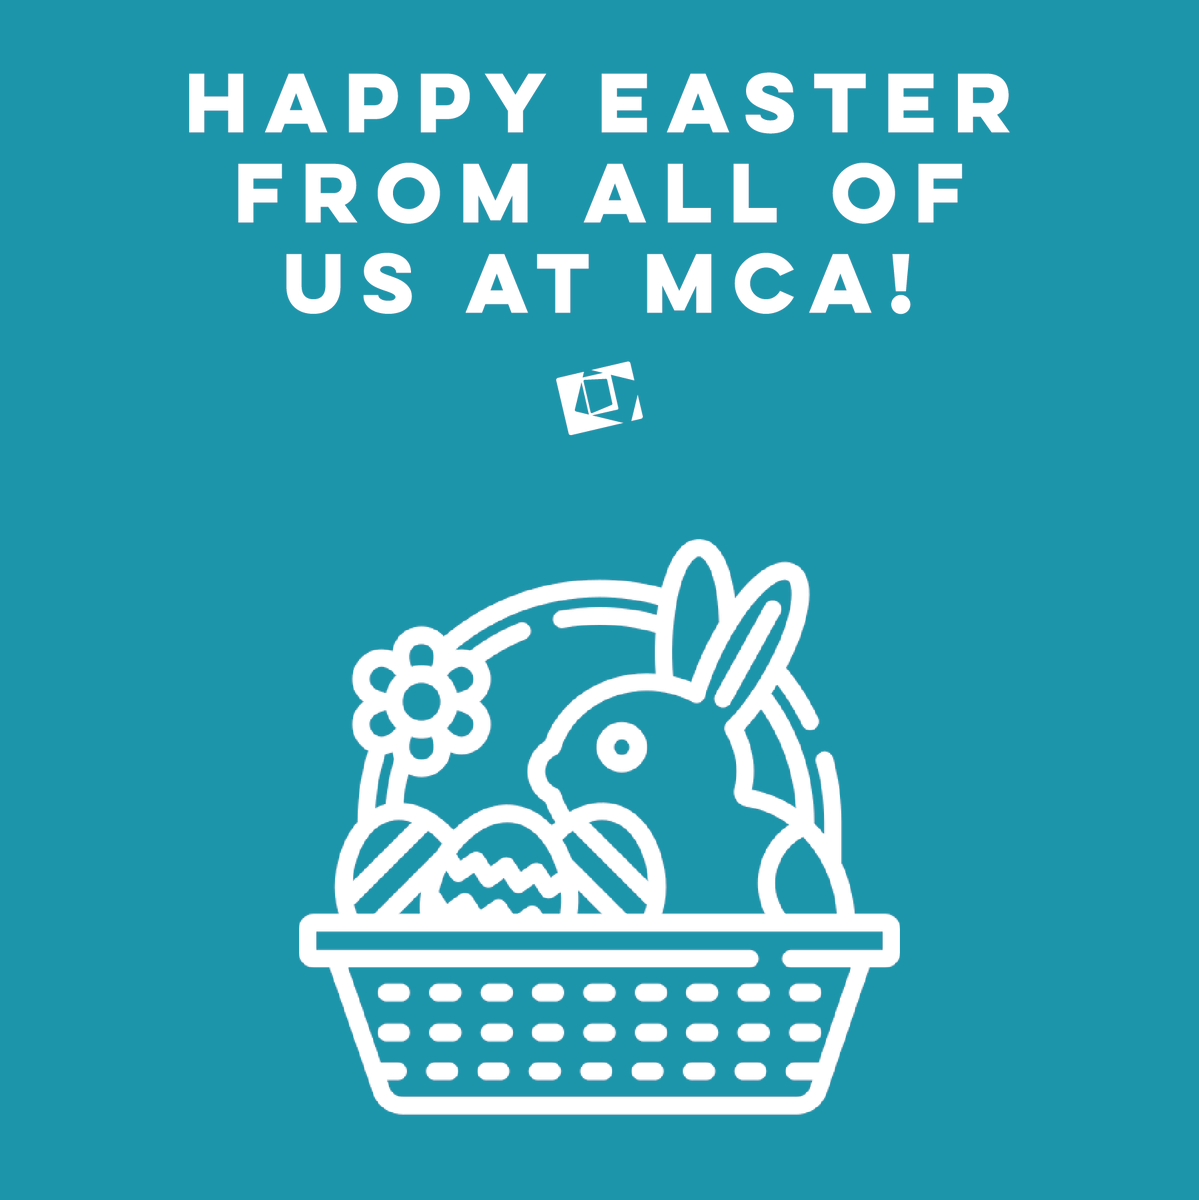 From all of us here at MCA, we wish you all a Happy Easter! 🐣🐰 #WeAreMCA